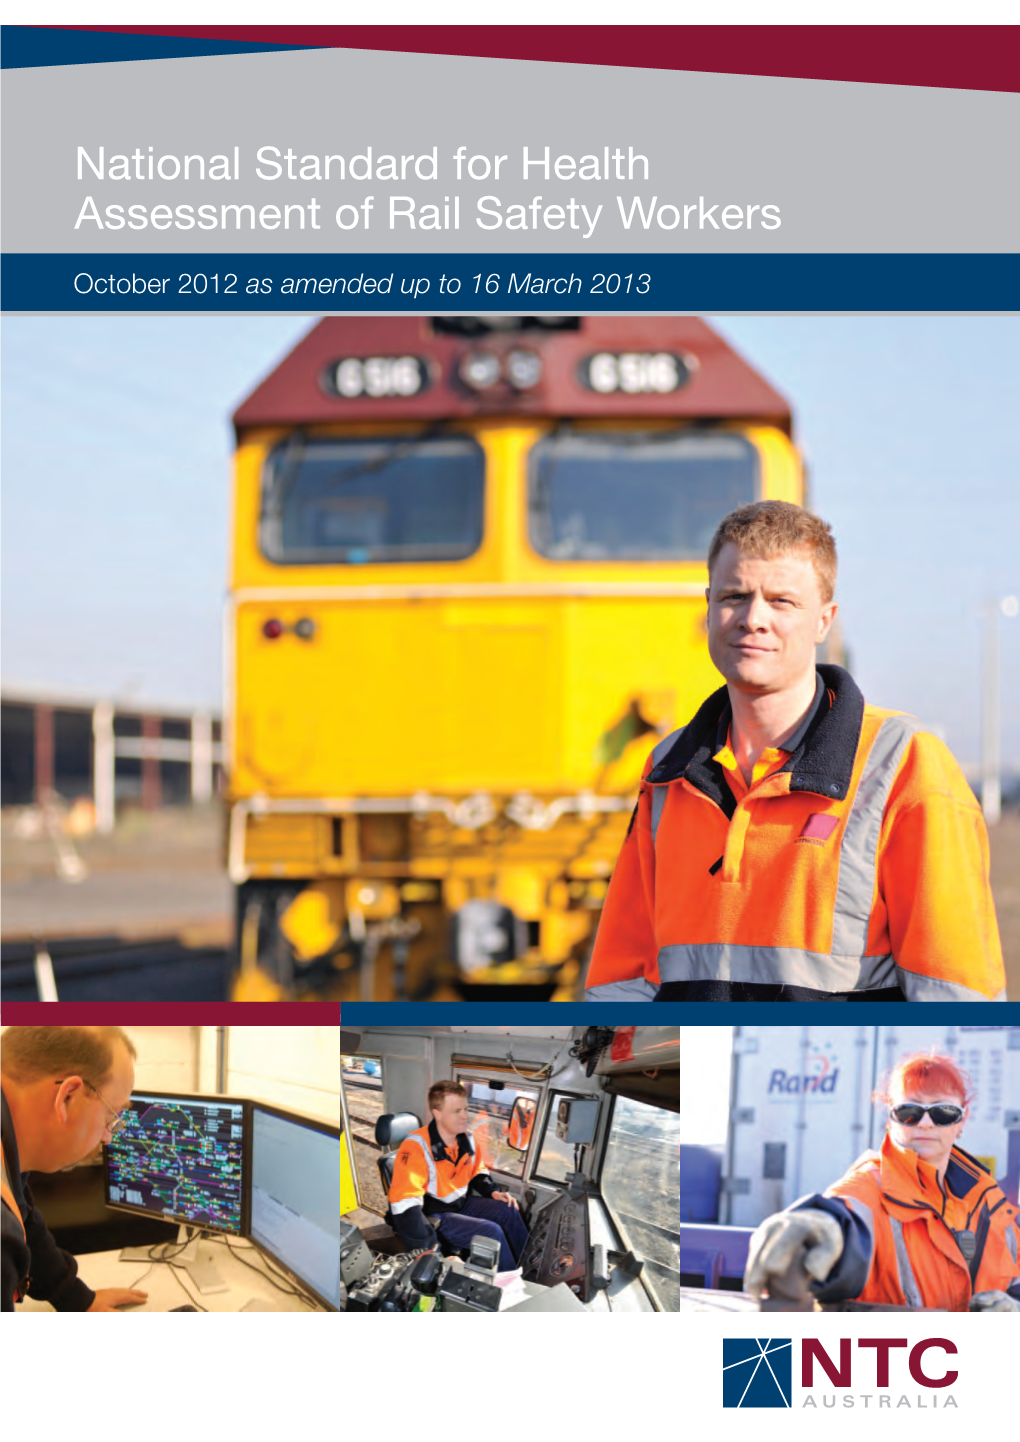 National Standard for Health Assessment of Rail Safety Workers - October 2012